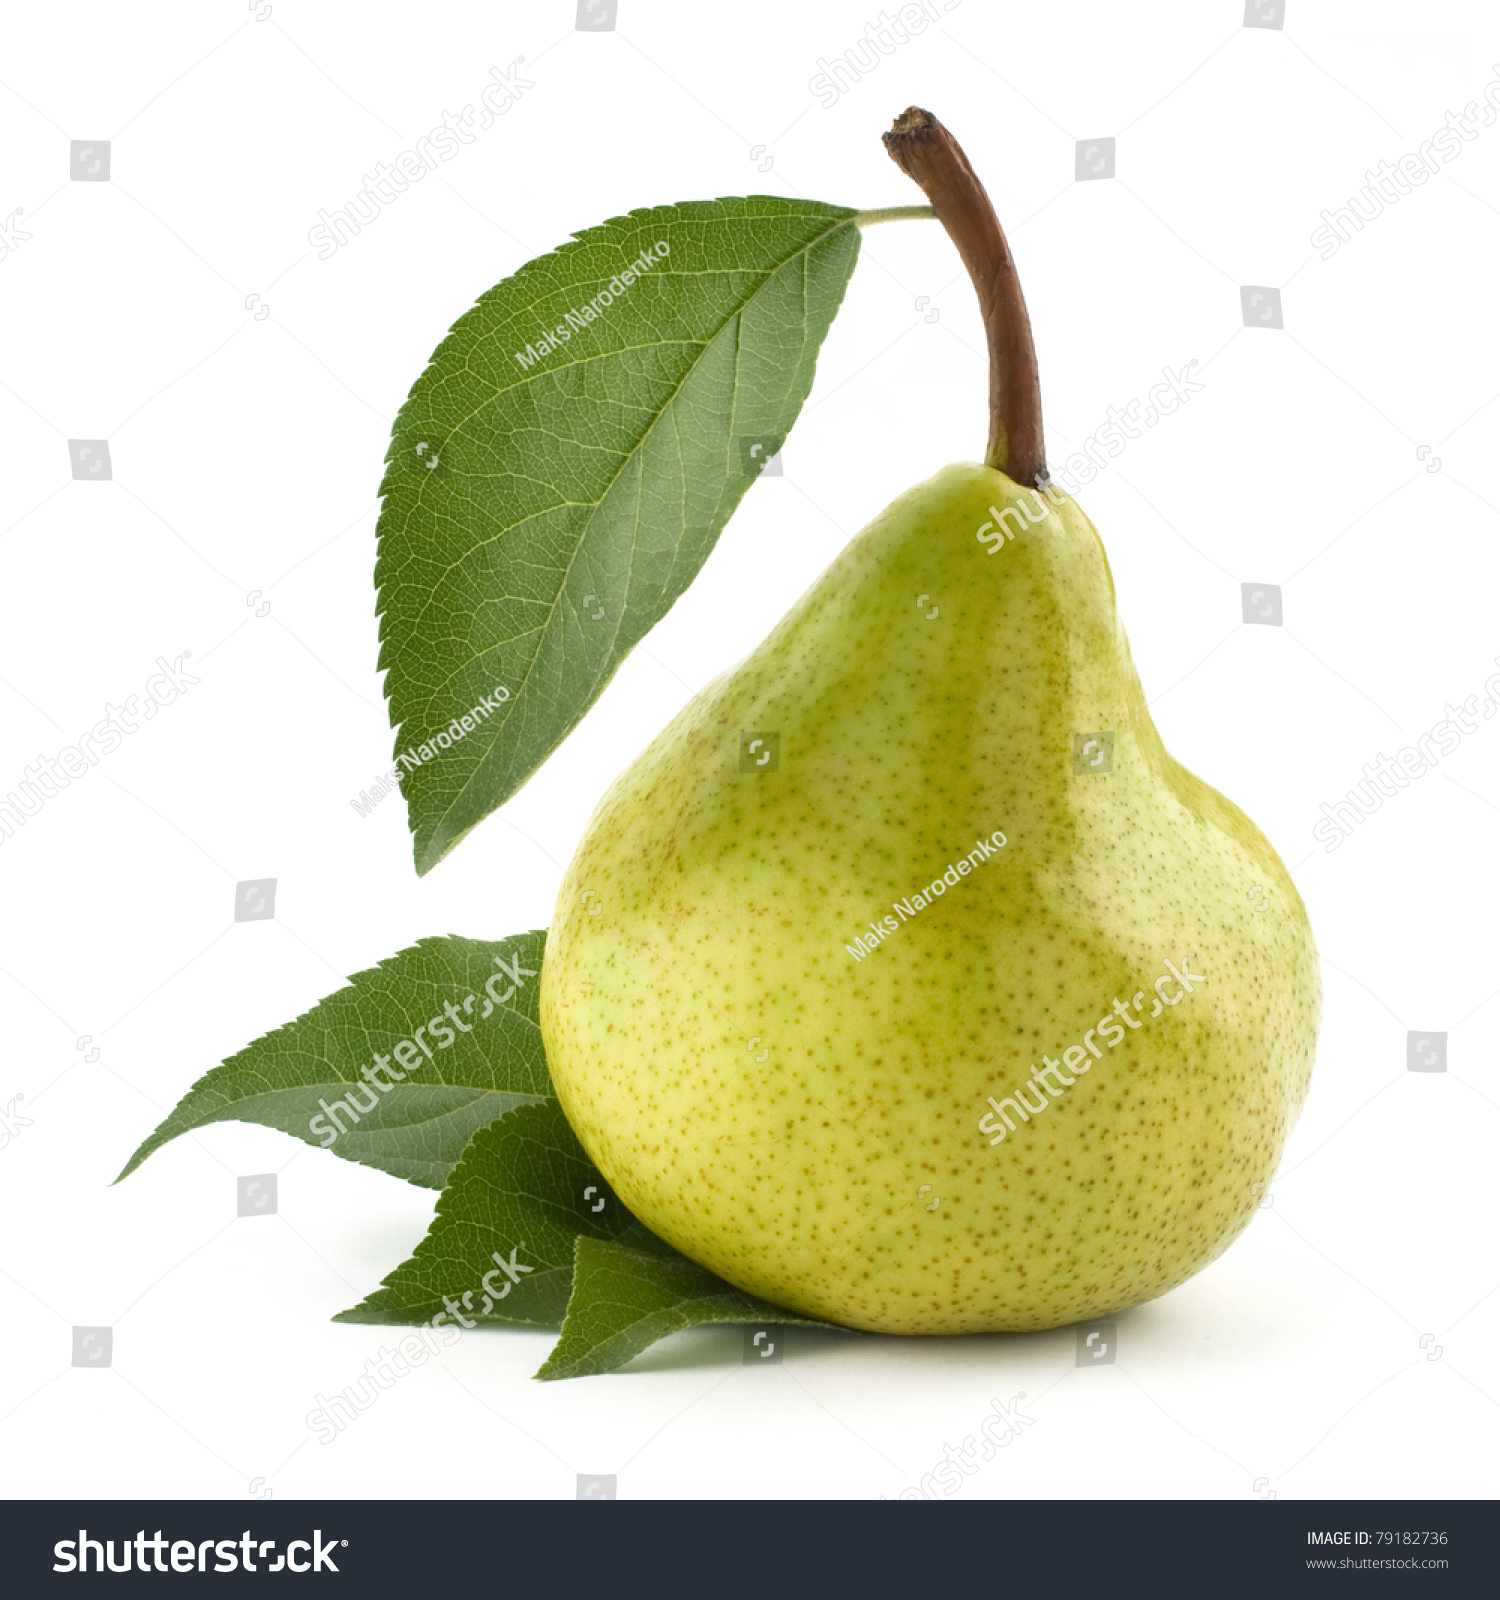 ripe pears isolated on white background #79182736